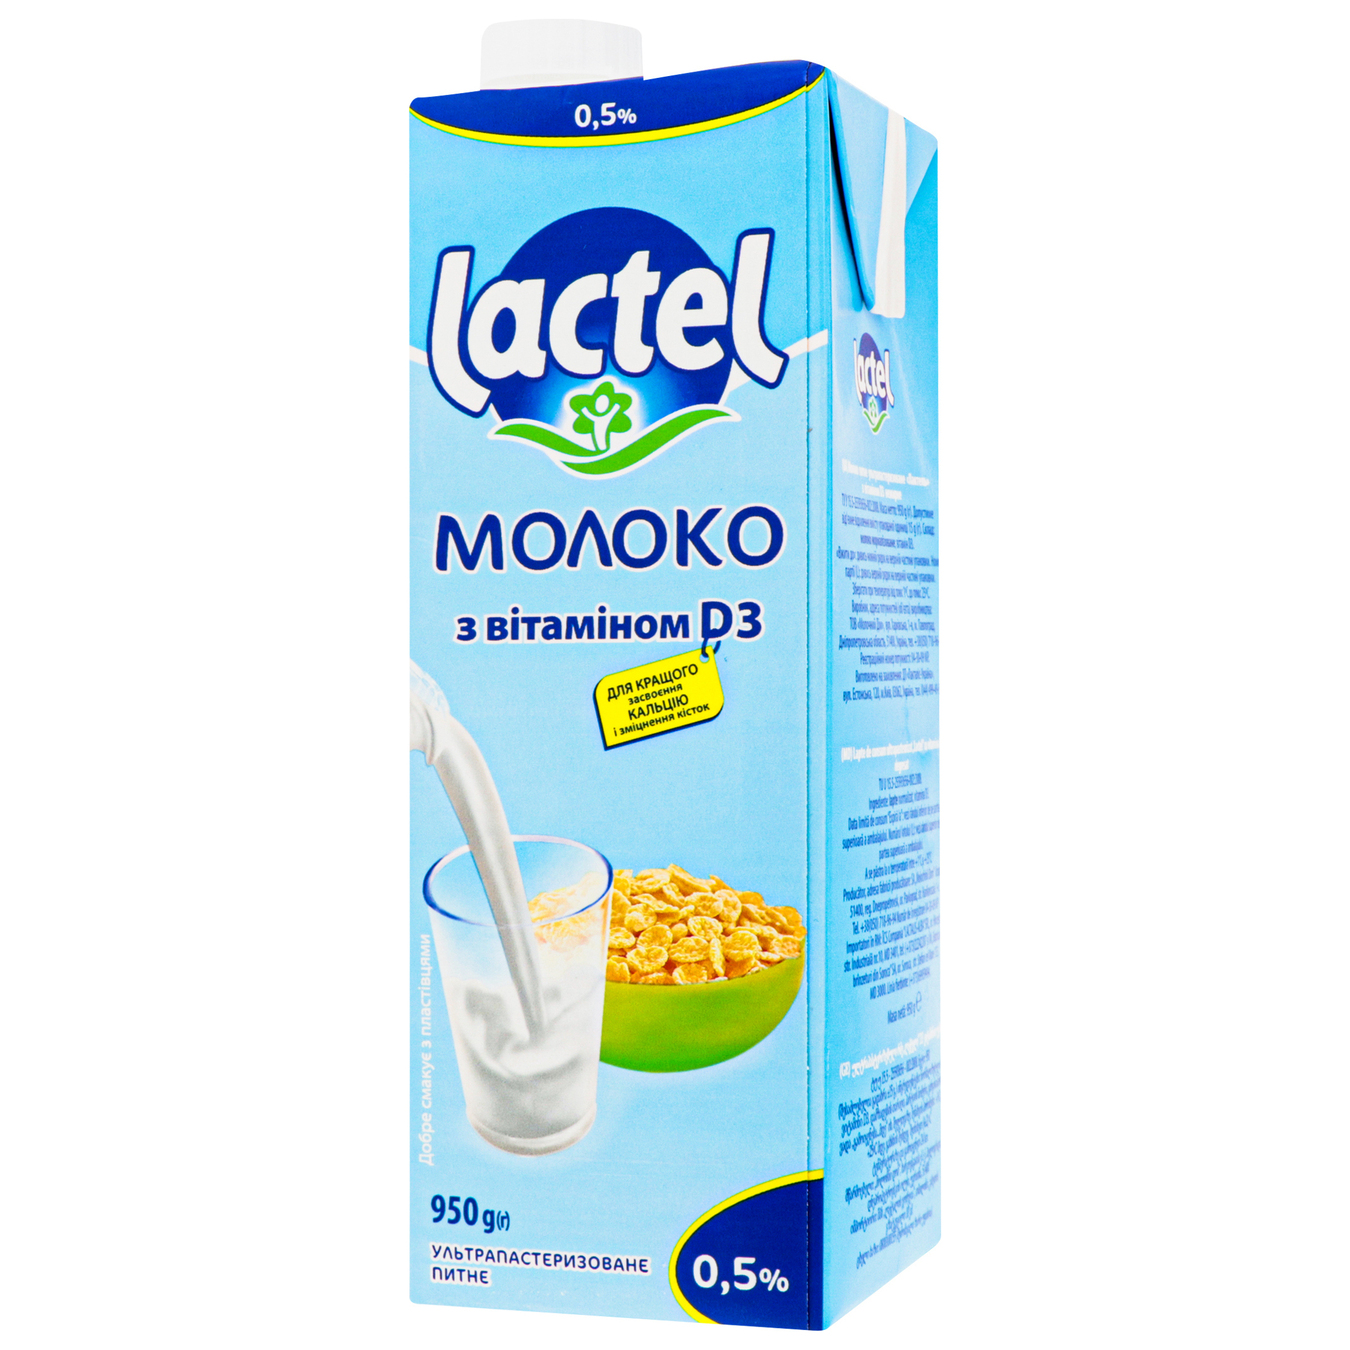 Lactel ultra-pasteurized Milk with vitamin D3 0,5% 950g